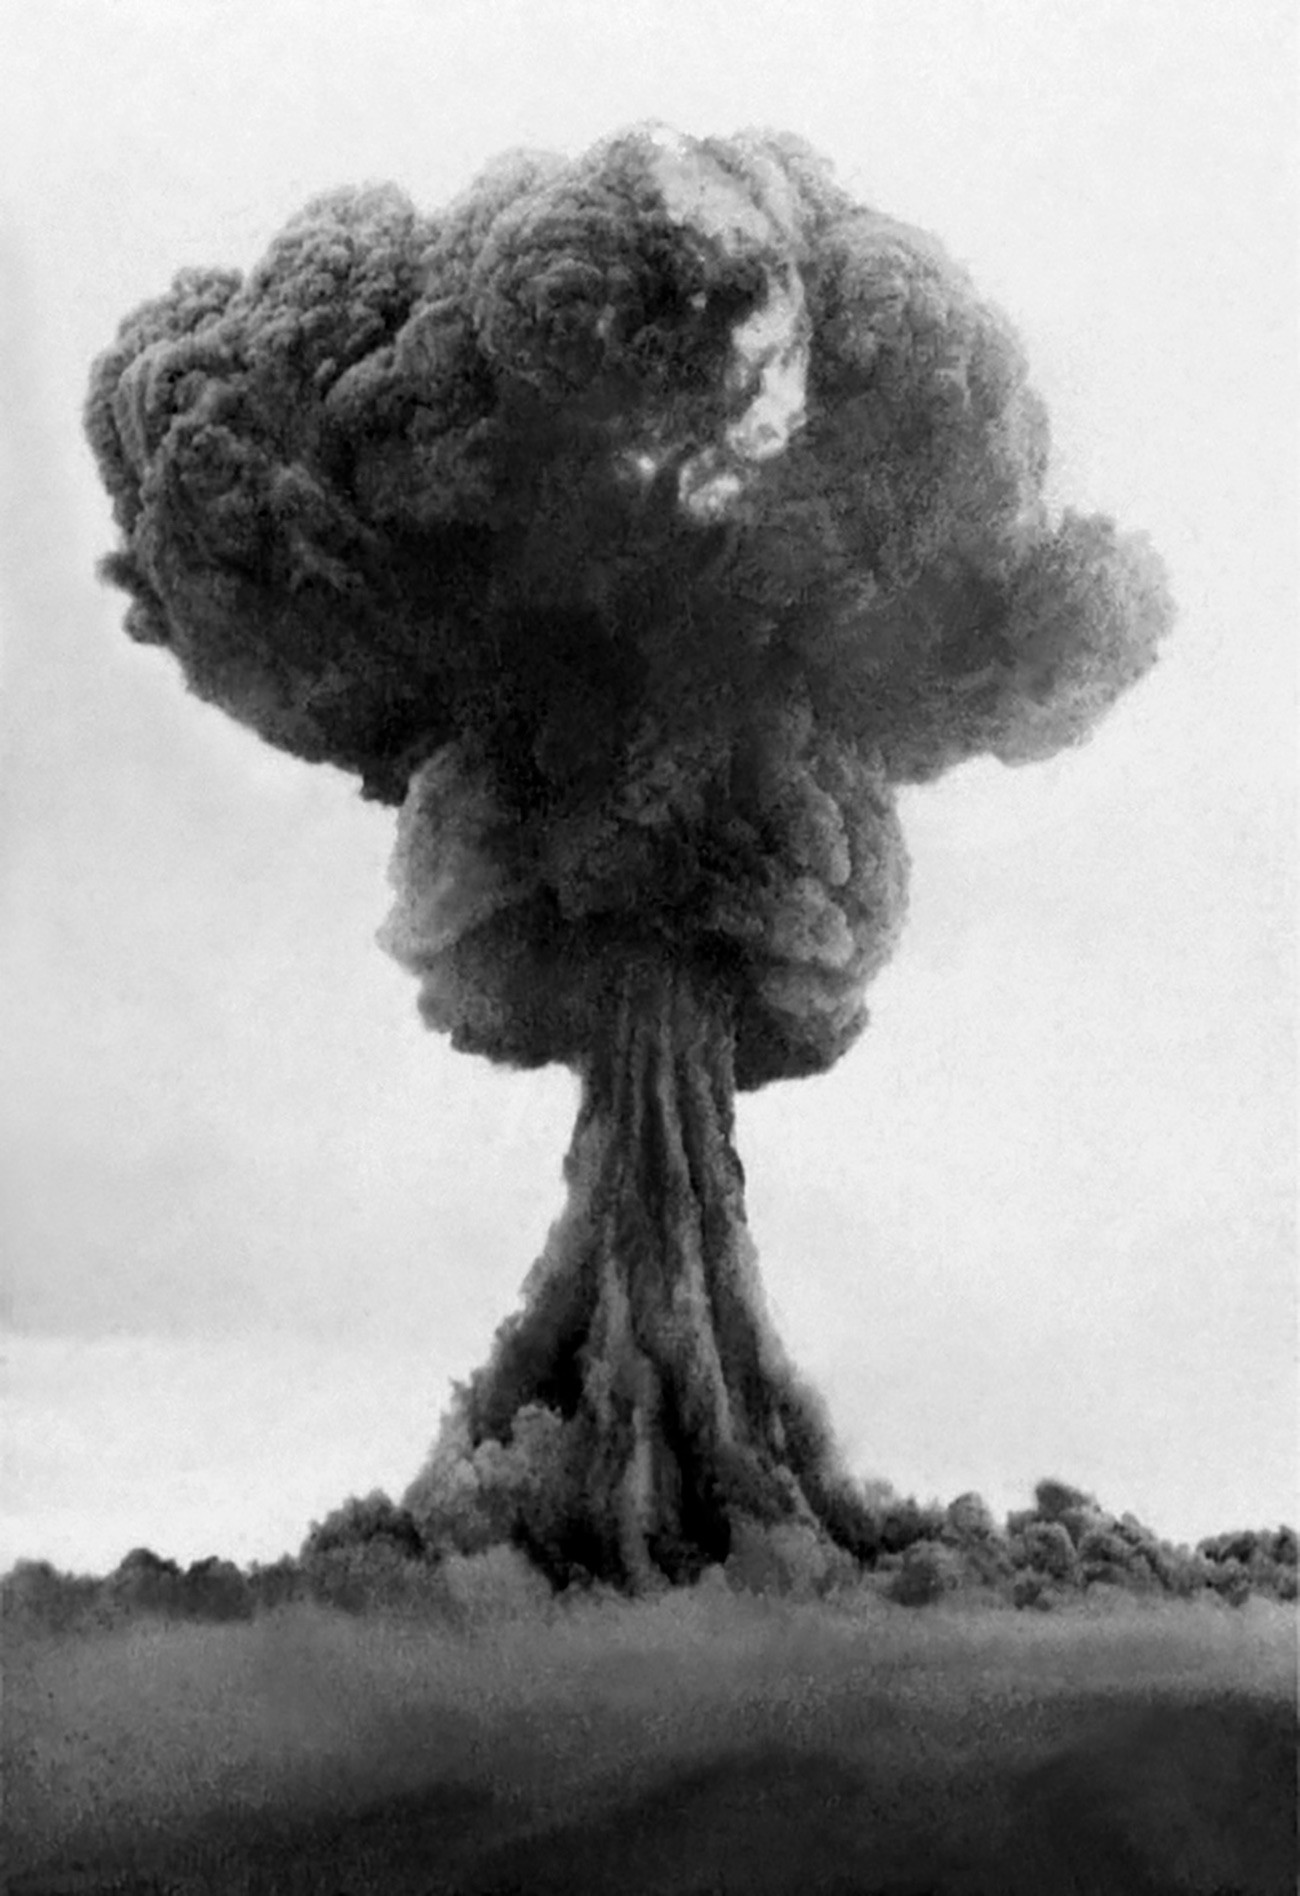 RDS-1 explosion. 